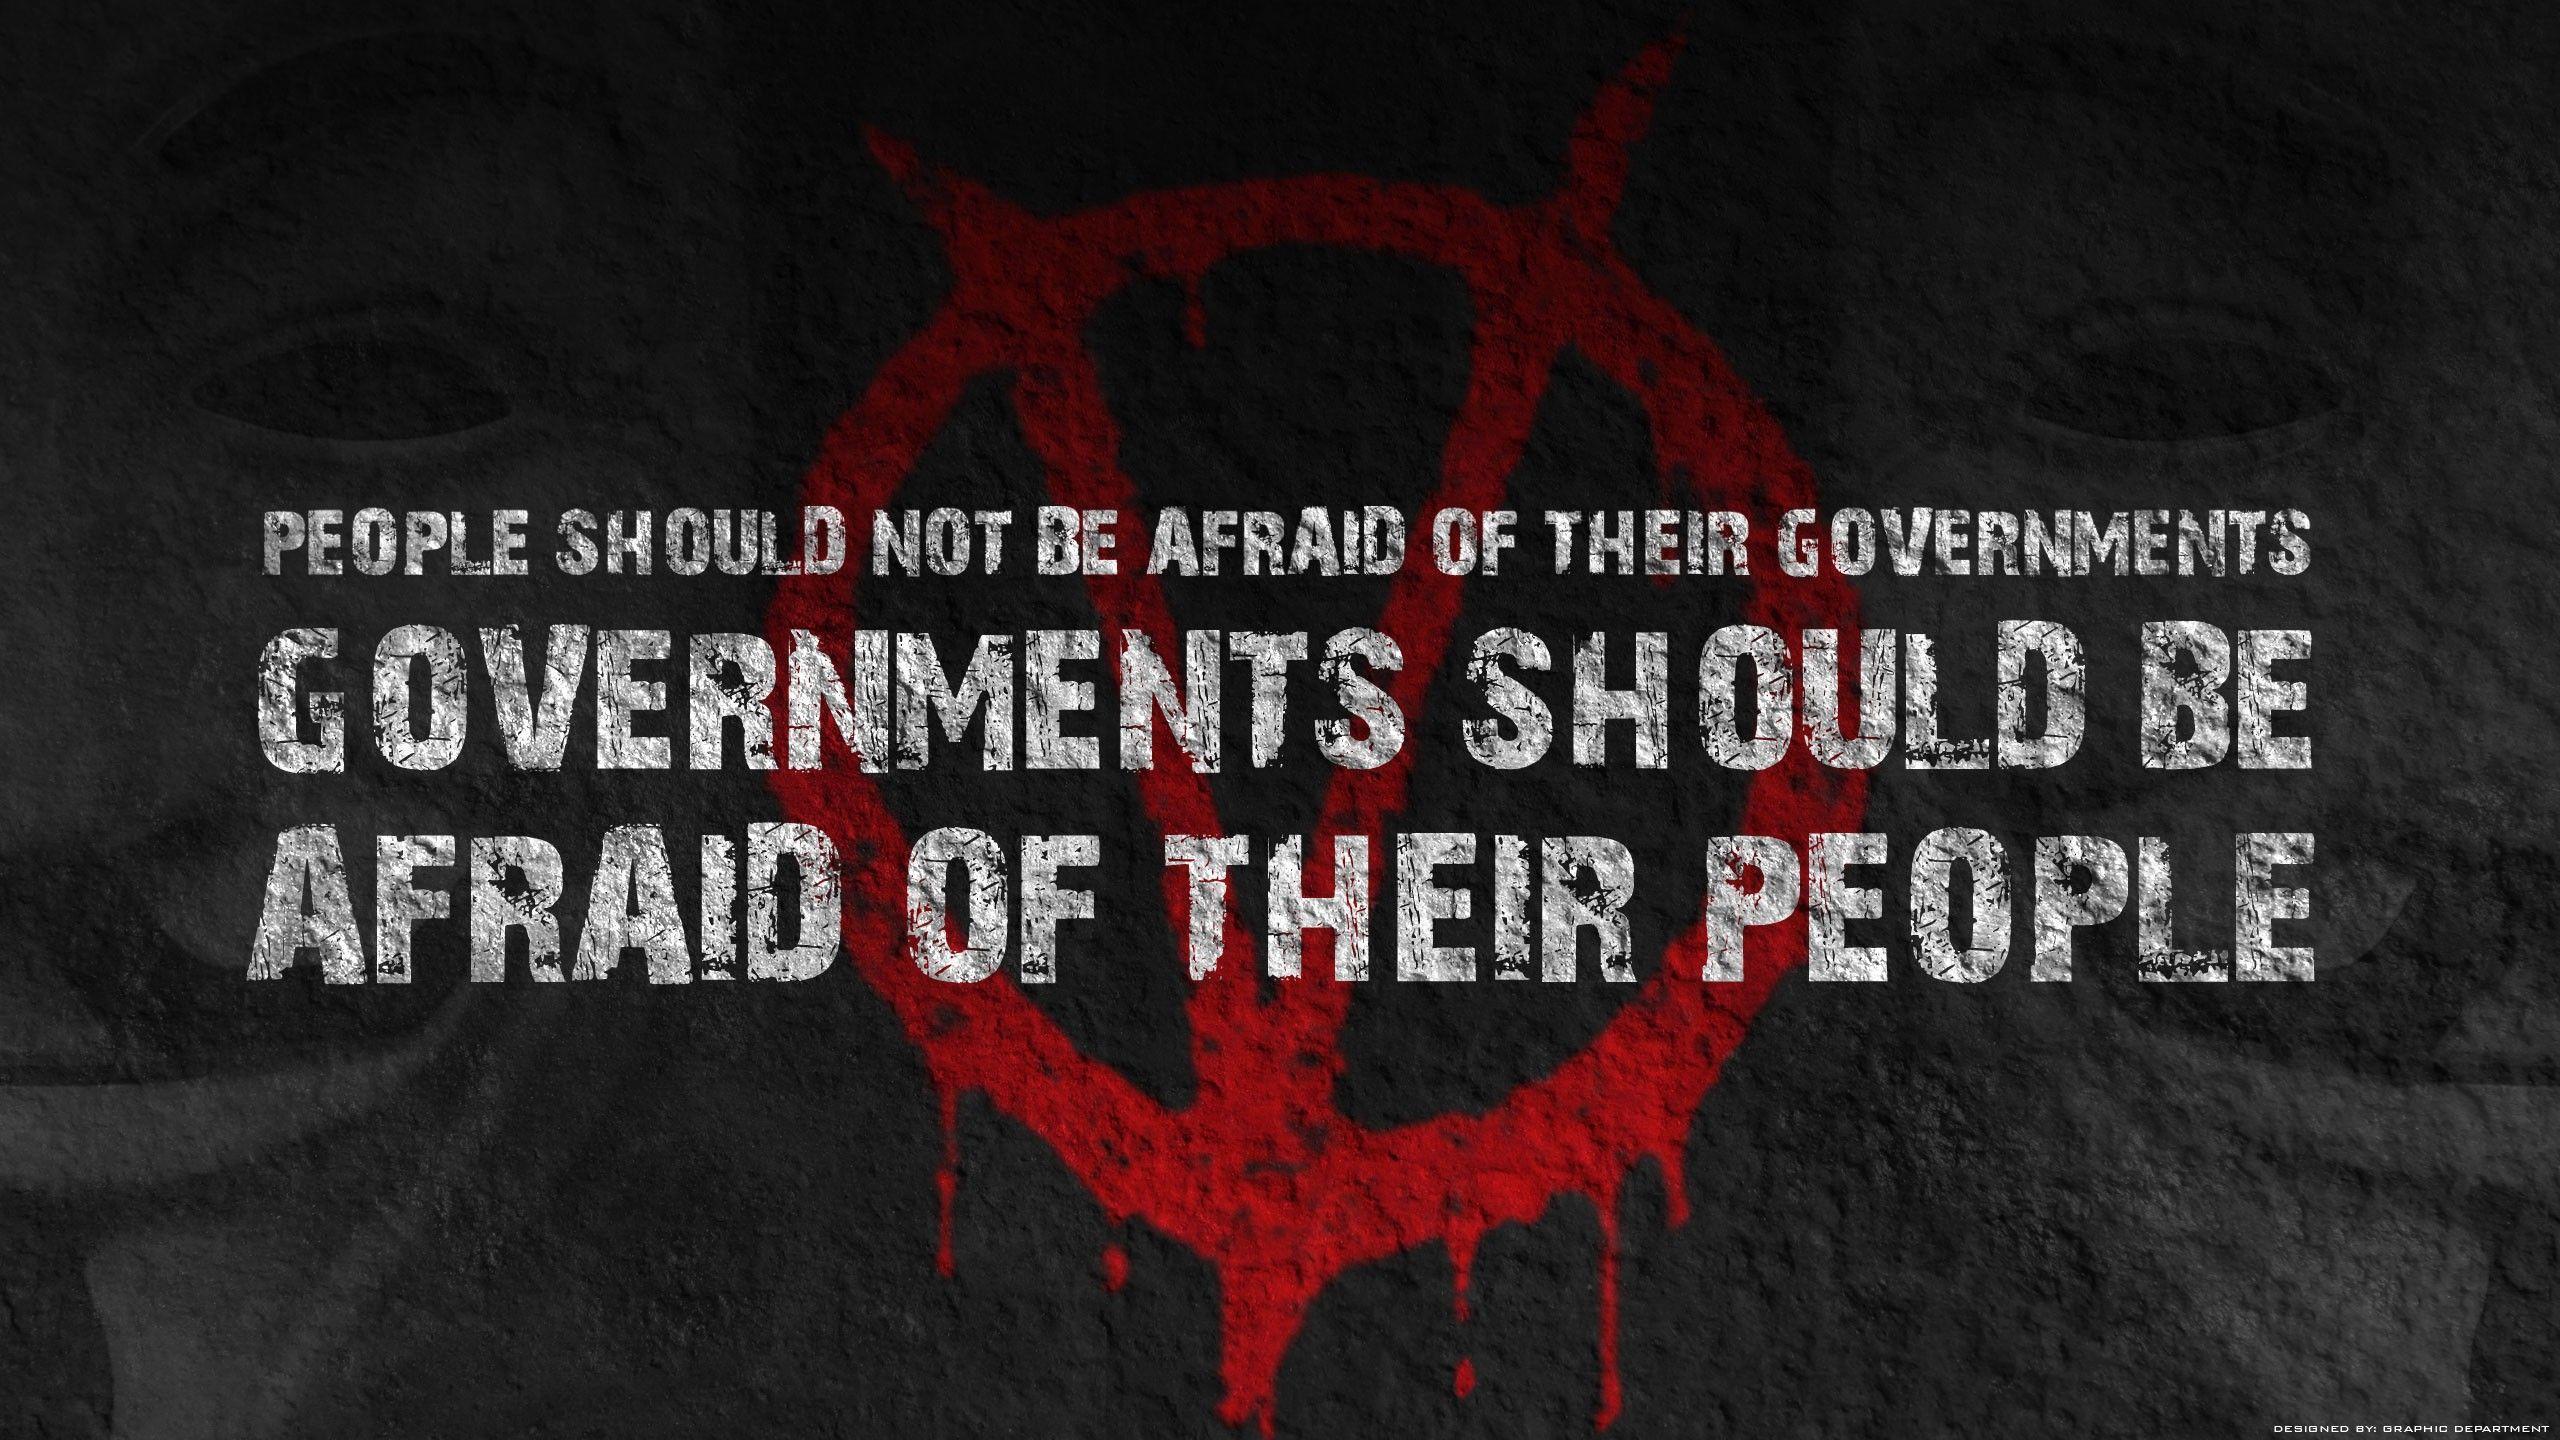 The government should fear the people wallpaper and image